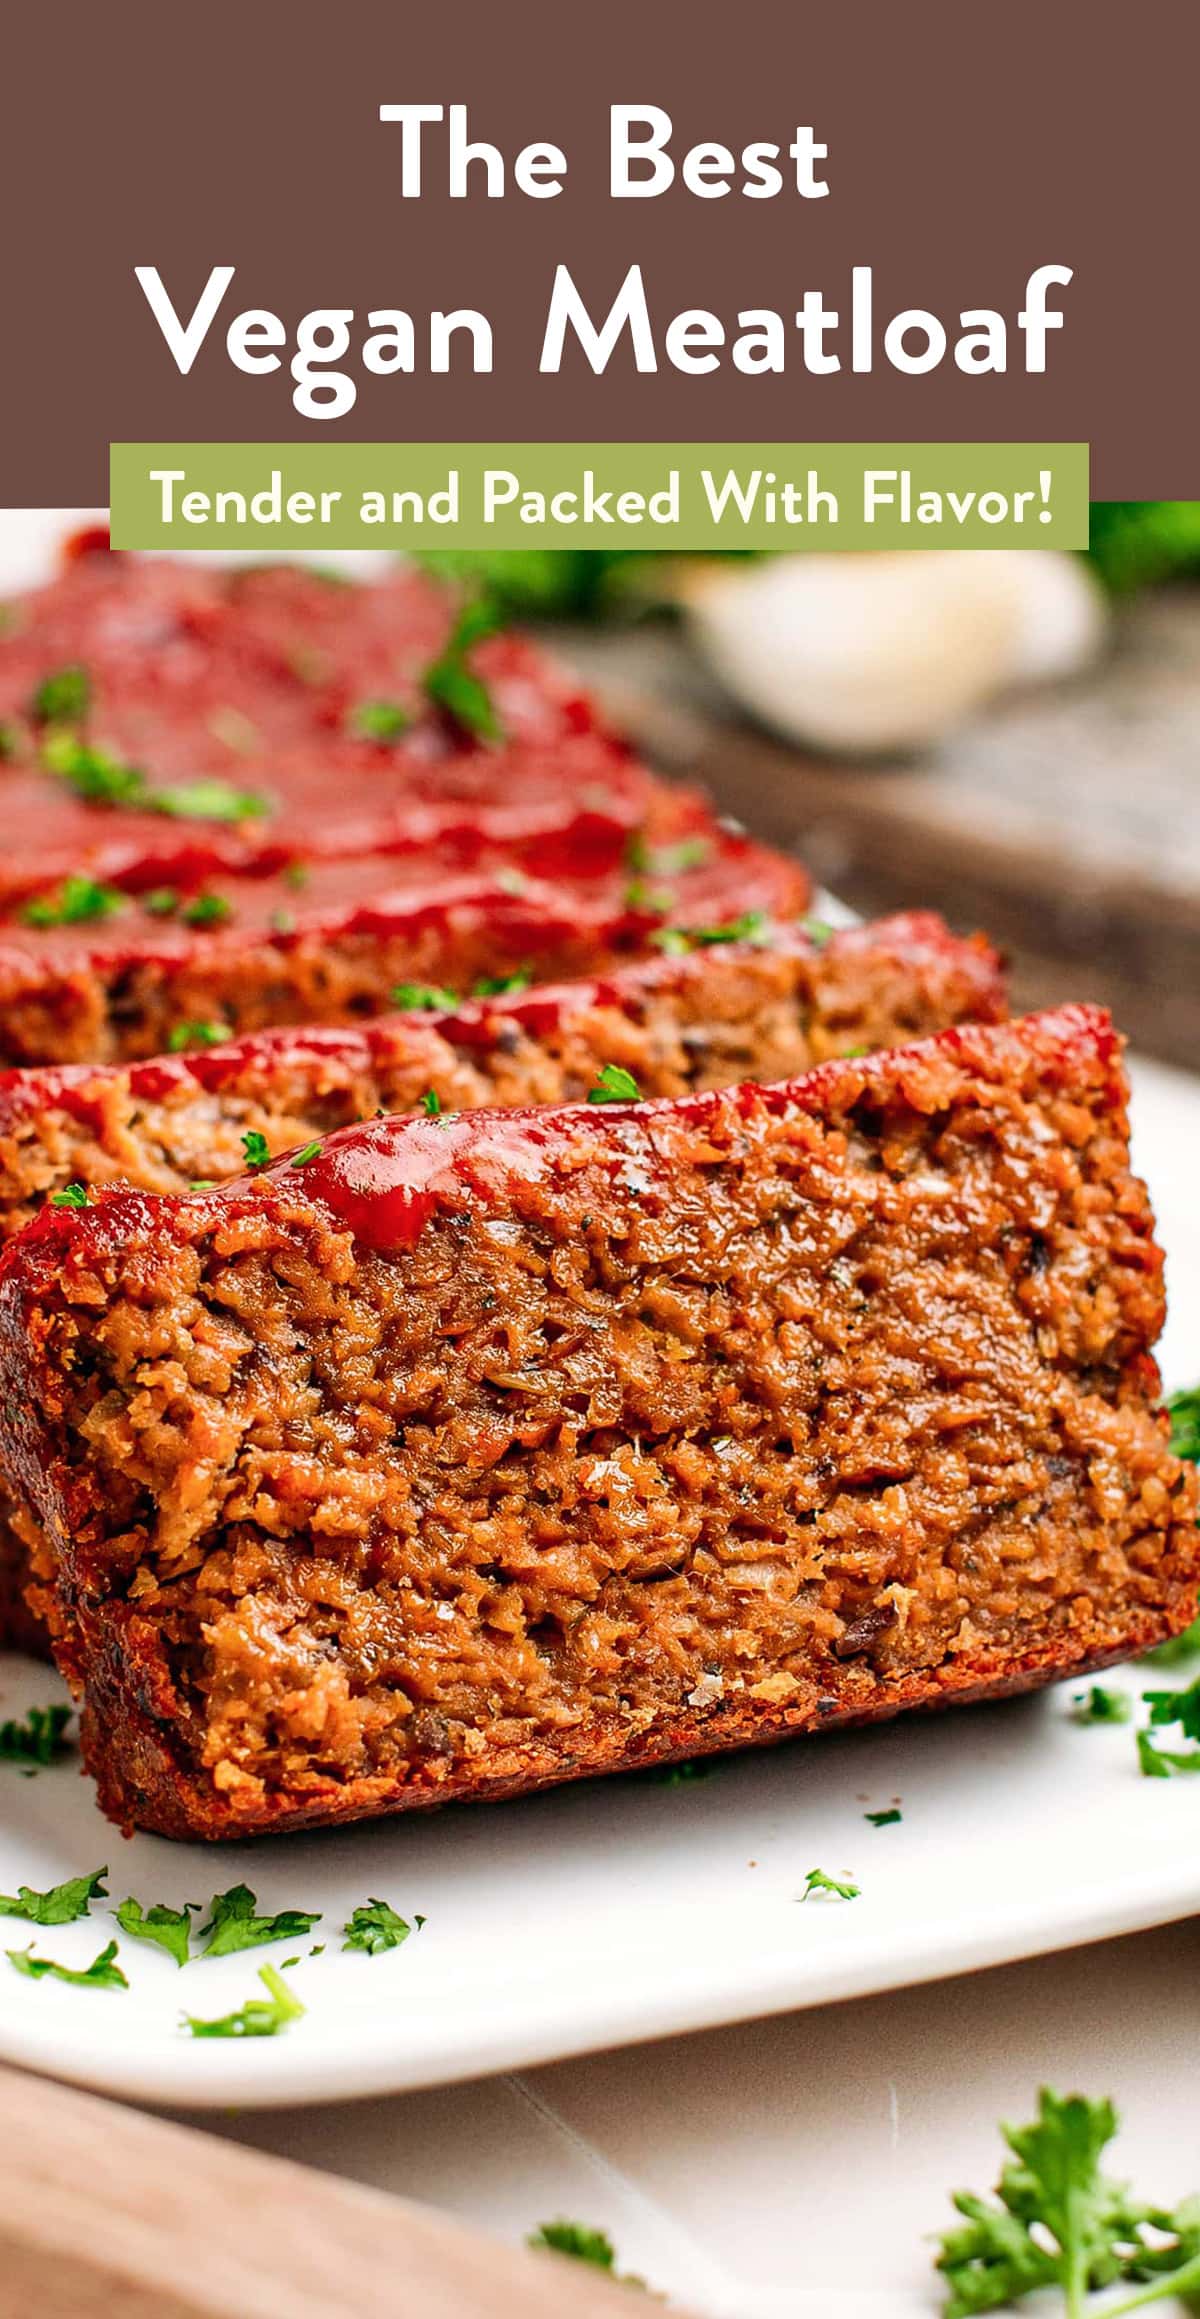 Looking for the best vegan meatloaf recipe? Look no further! Our plant-based meatloaf is unbelievably tender, moist, and packed with flavor. Made with soy curls, white beans, and a blend of flavorful seasonings, it's then glazed with a sweet and tangy sauce. It's sure to be a crowd-pleaser! #veganmeatloaf #vegan #meatloaf #soycurls